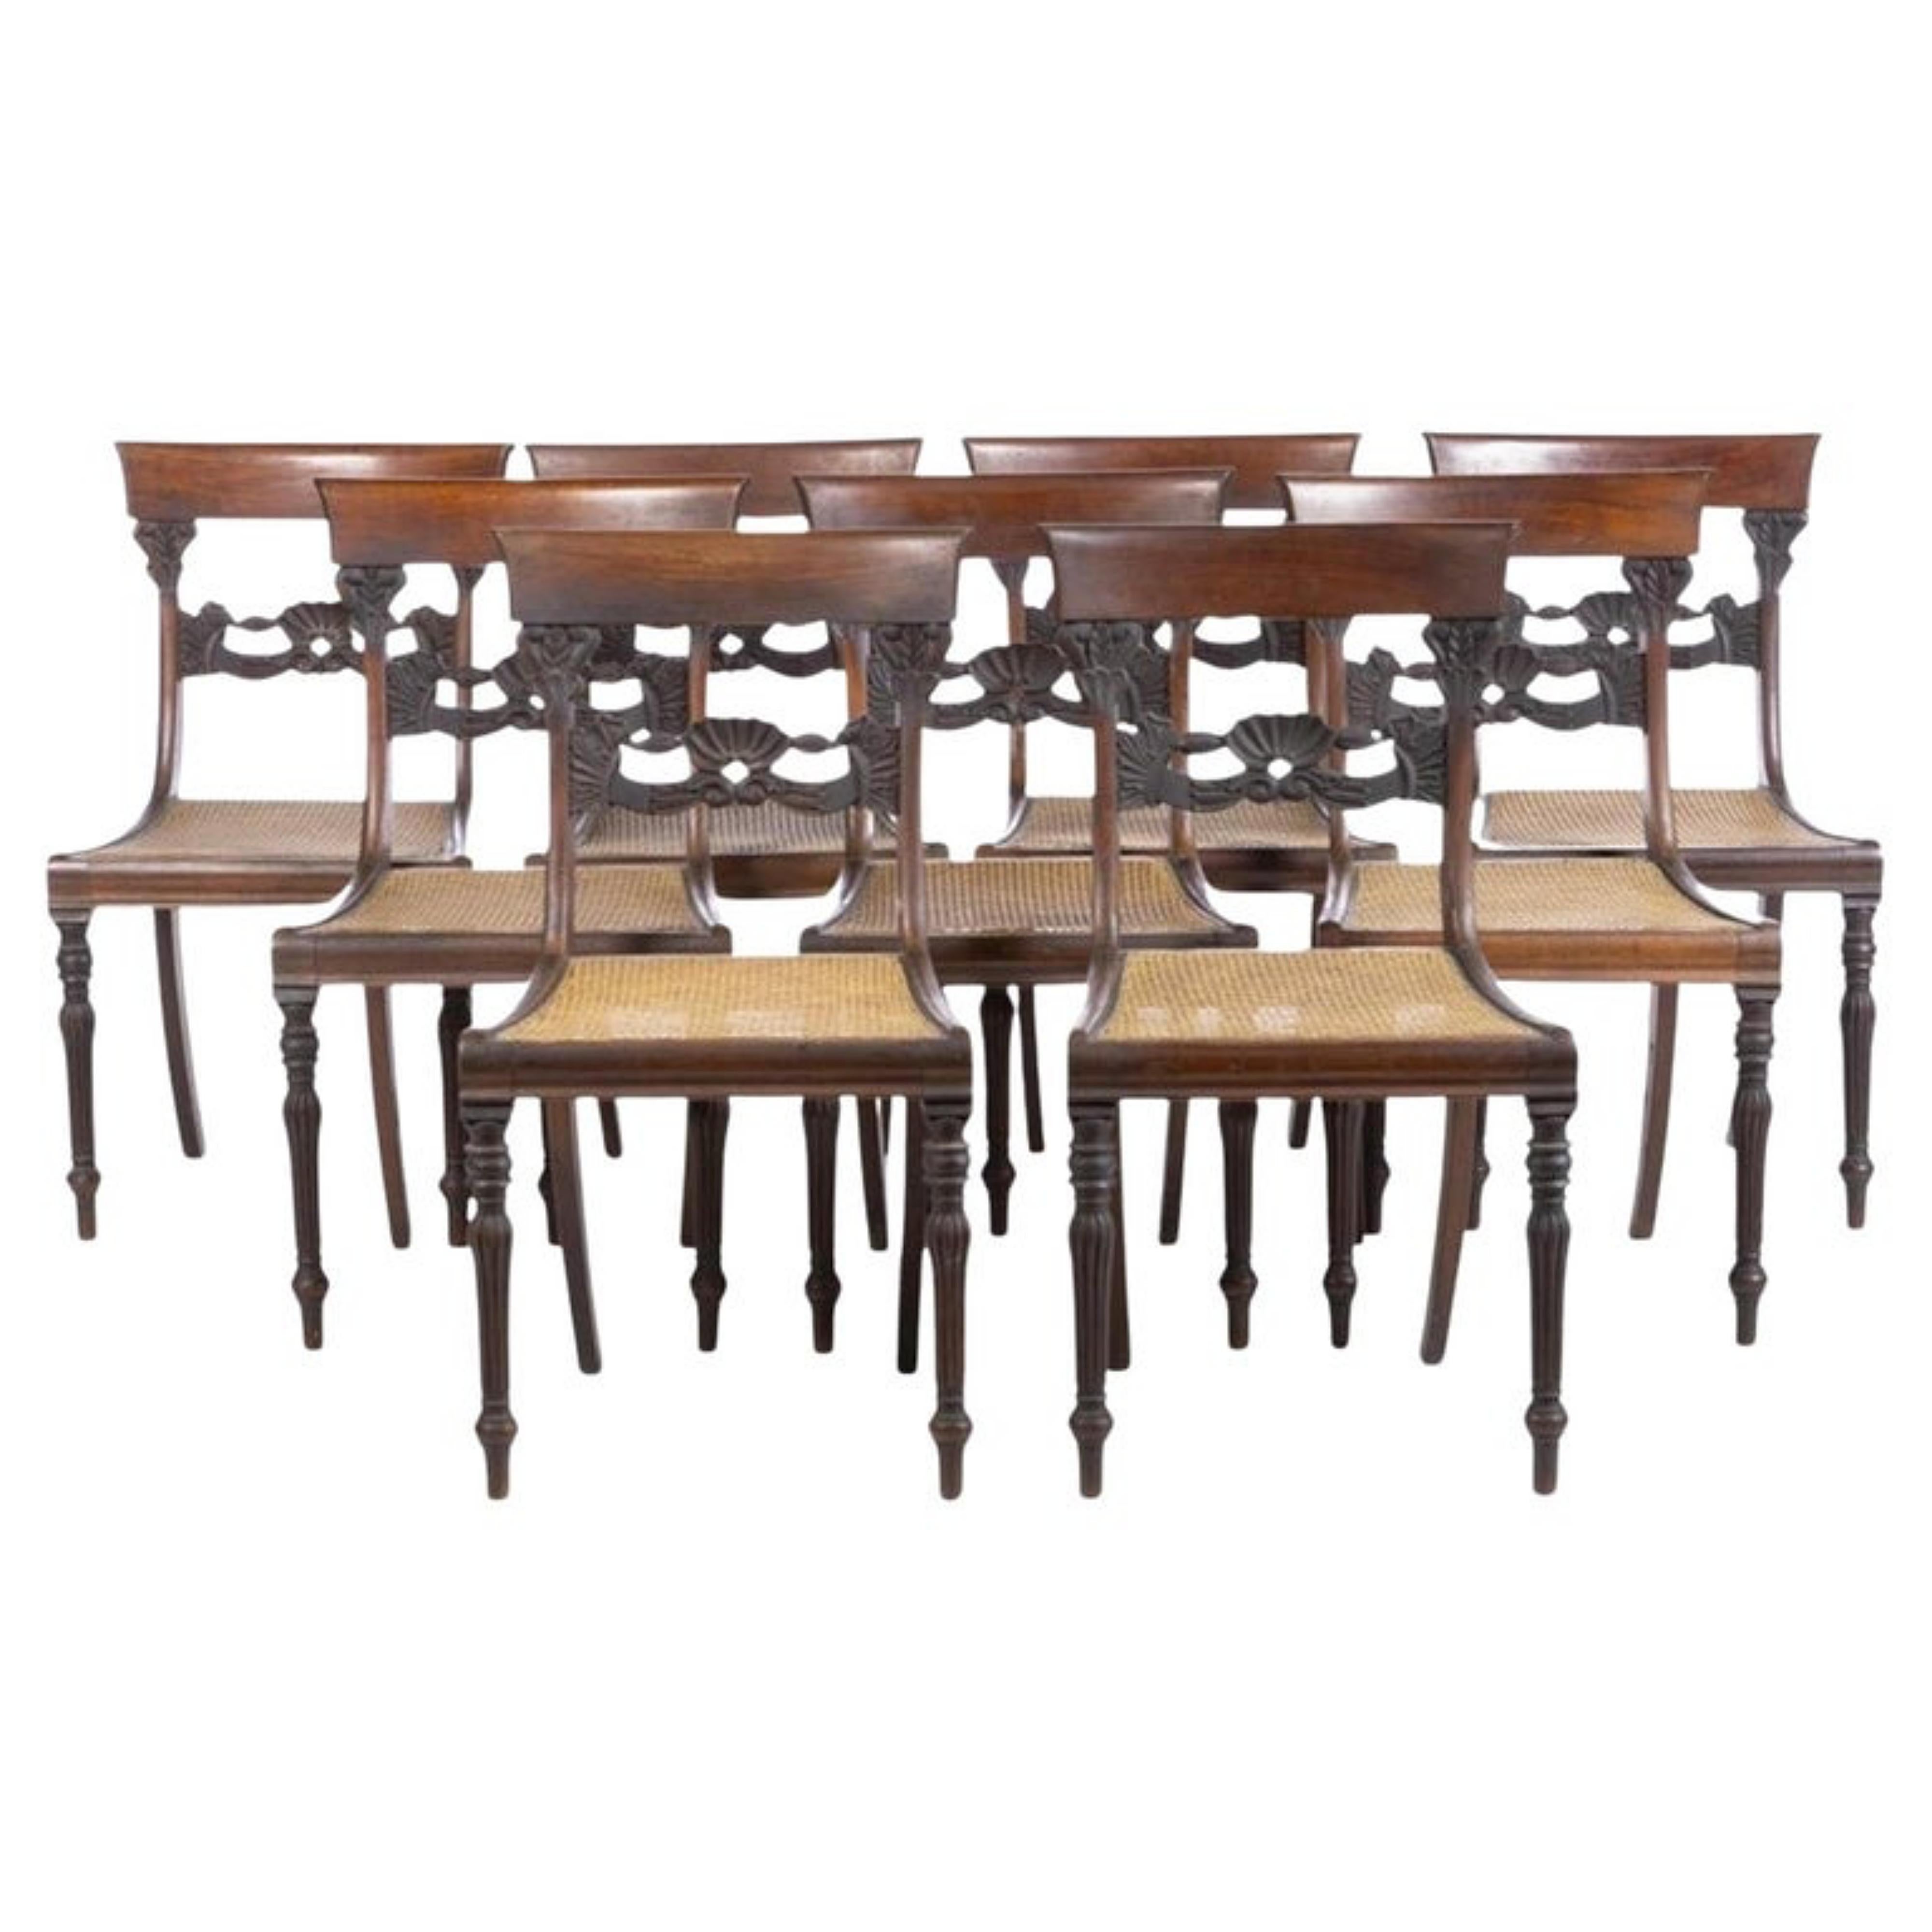 Wood Set of 9 Portuguese Chairs, 19th Century For Sale